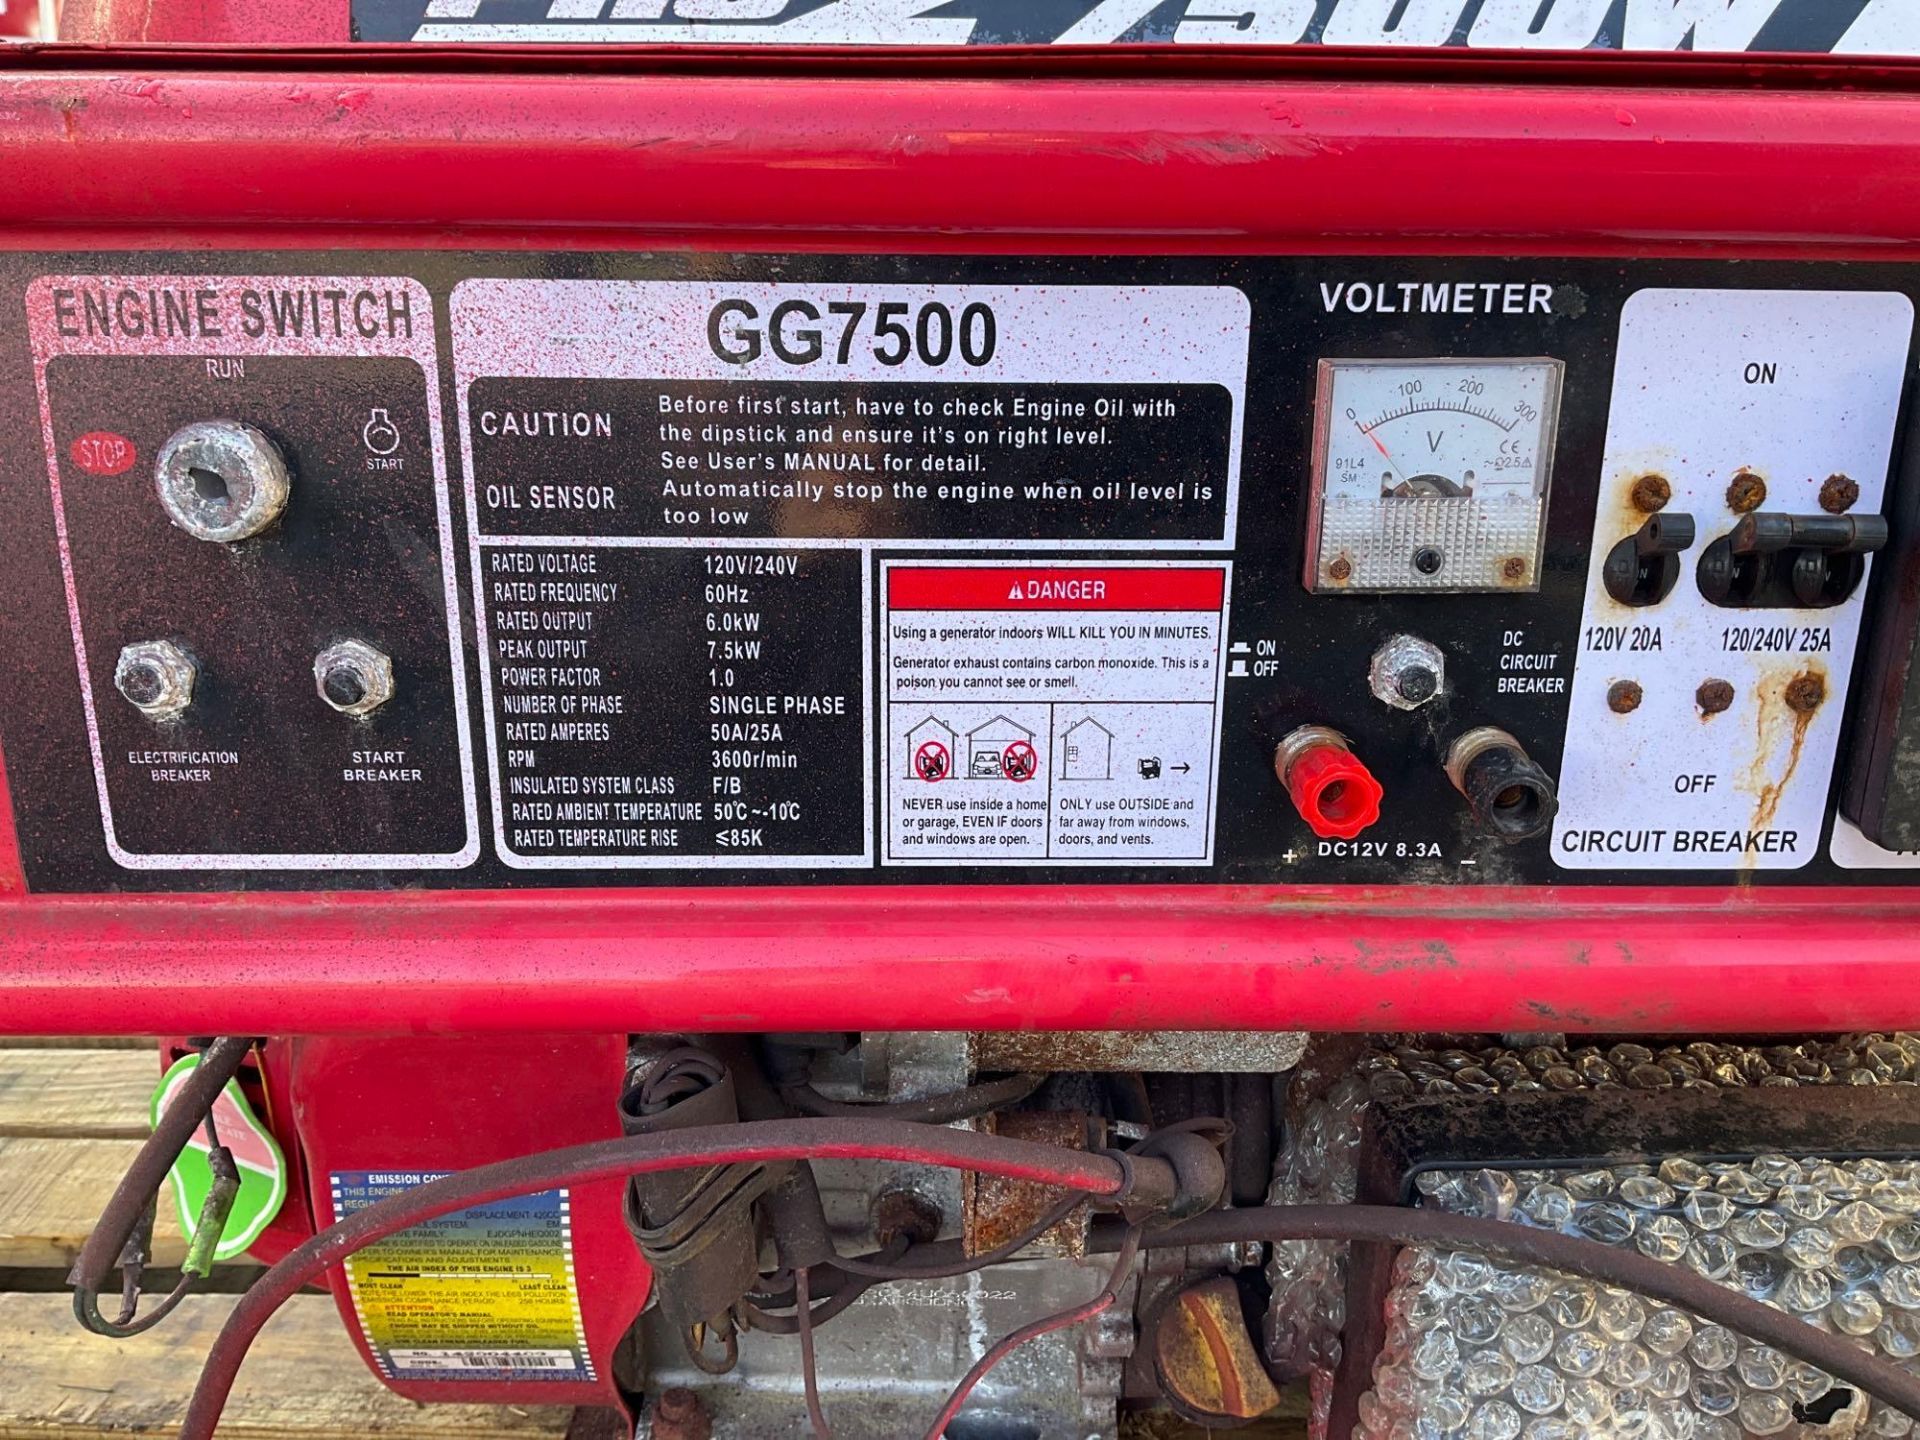 GENTRON PRO2 7500W GENERATOR MIDEL GG7500, GAS POWERED, APPROX 120/240 RATED VOLTS, SINGLE PHASE, - Image 8 of 21